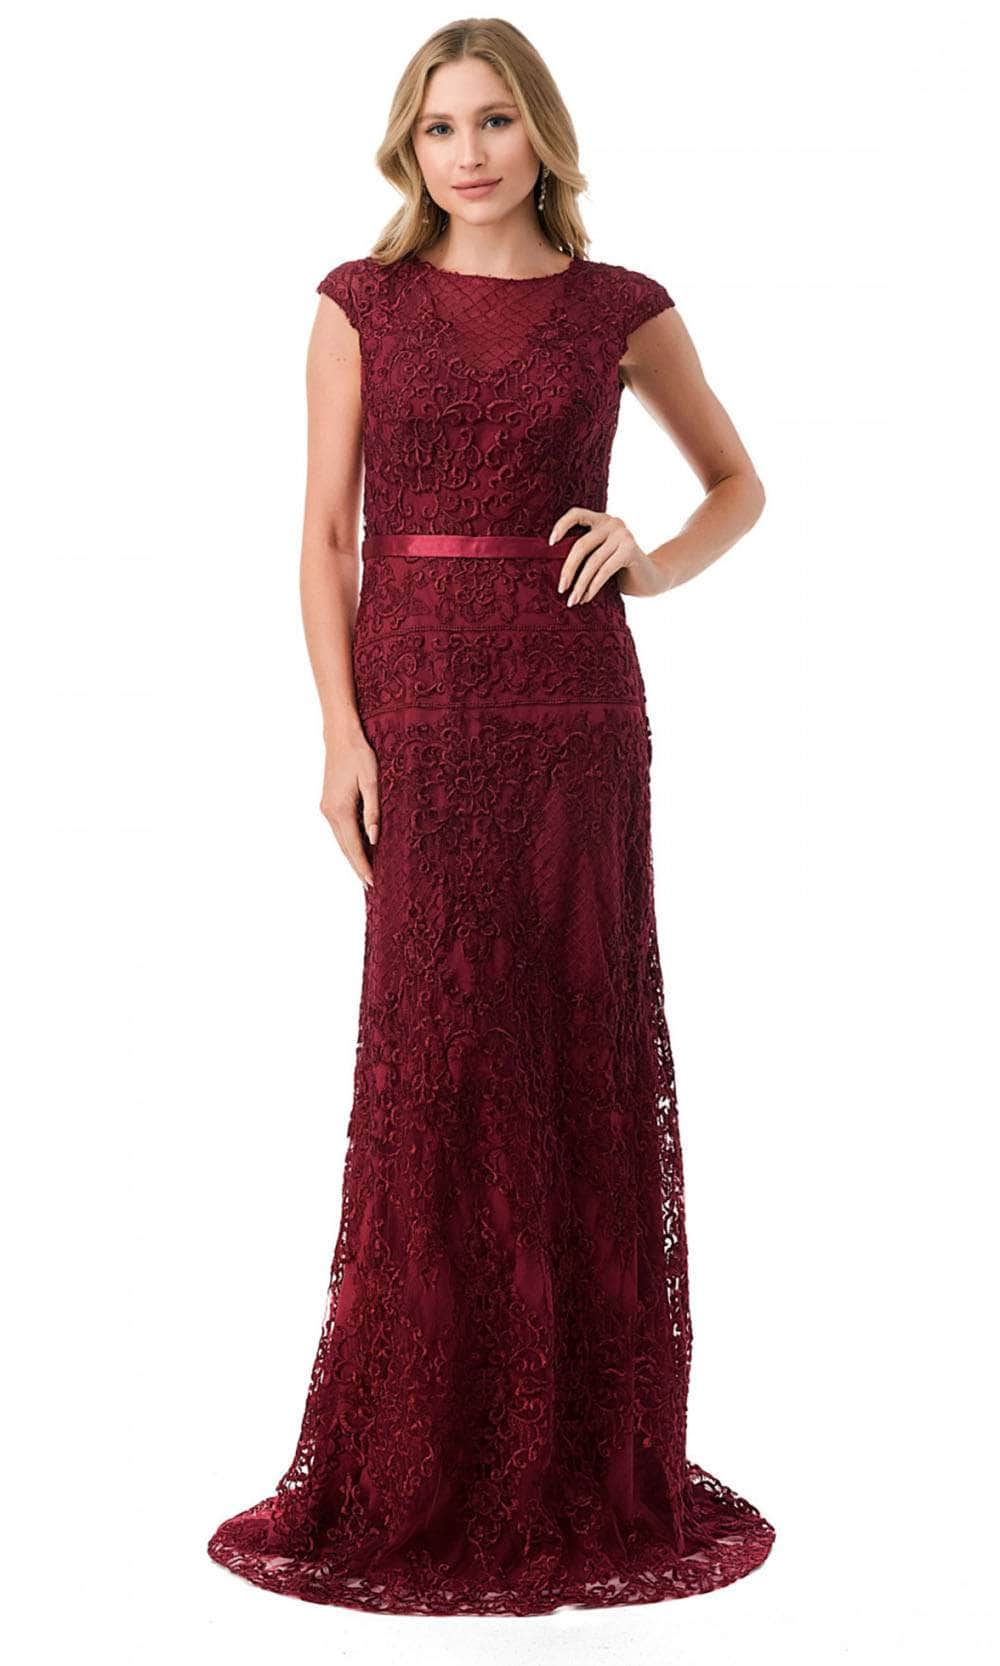 Image of Aspeed Design M2732 - Cap Sleeve Embroidered Formal Dress